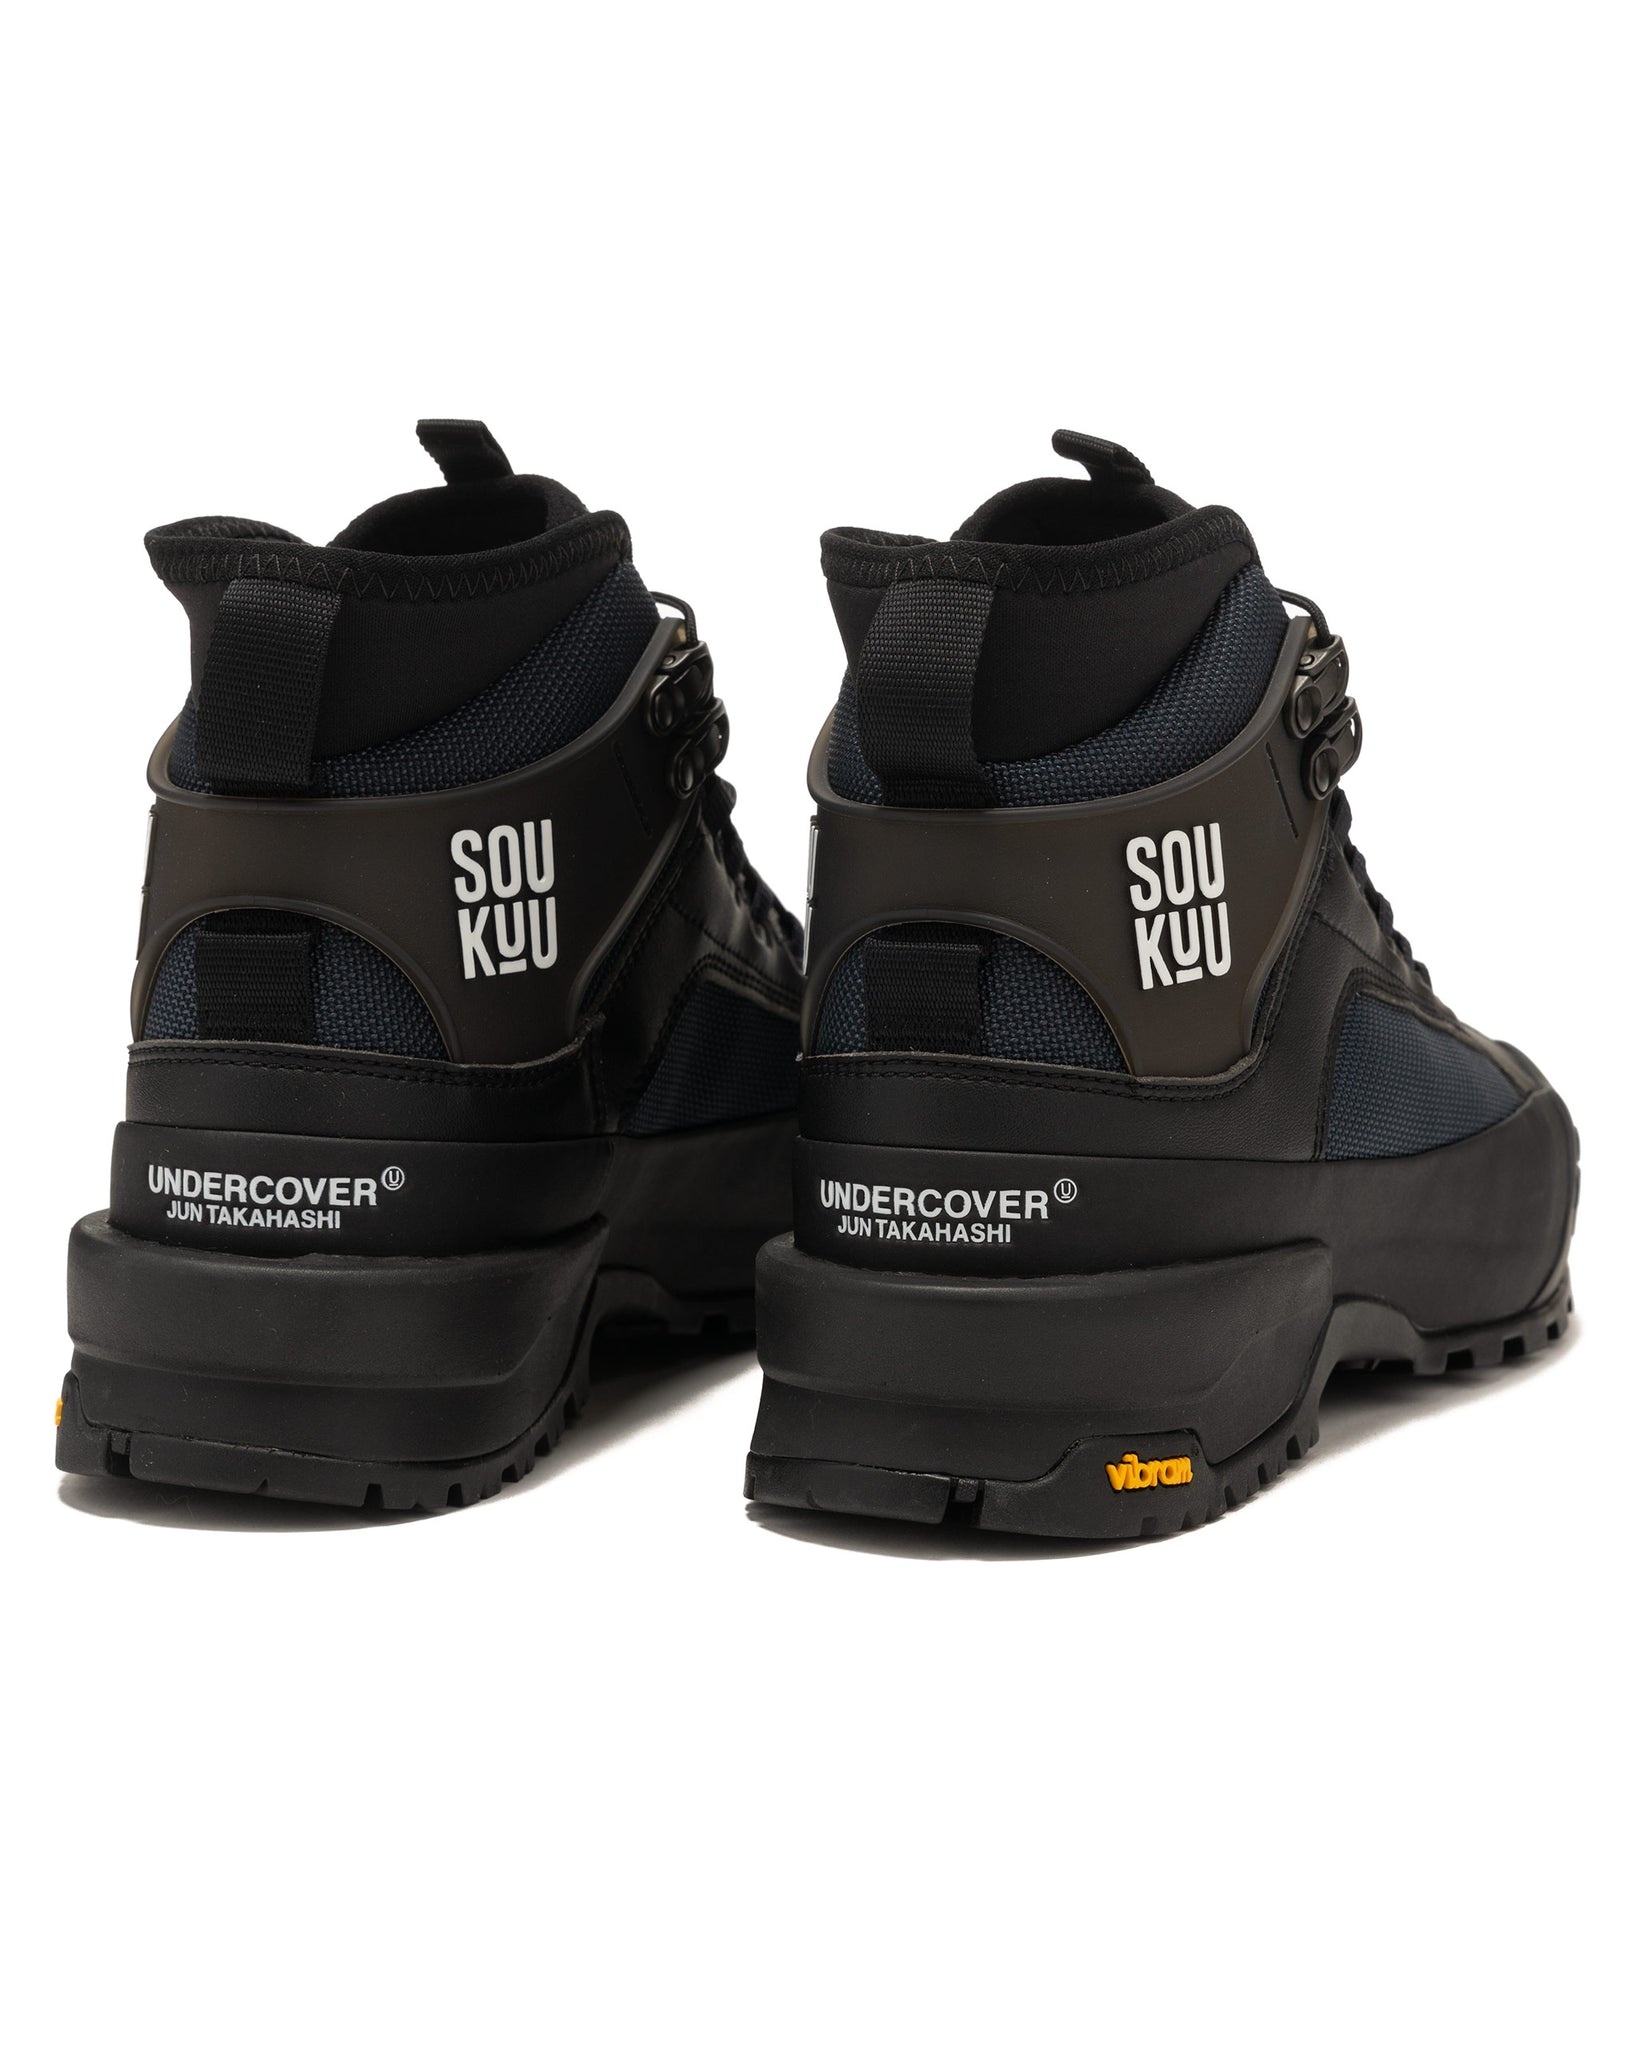 The North Face x Undercover SOUKUU GLENCLYFFE TNF BLACK | REVERSIBLE